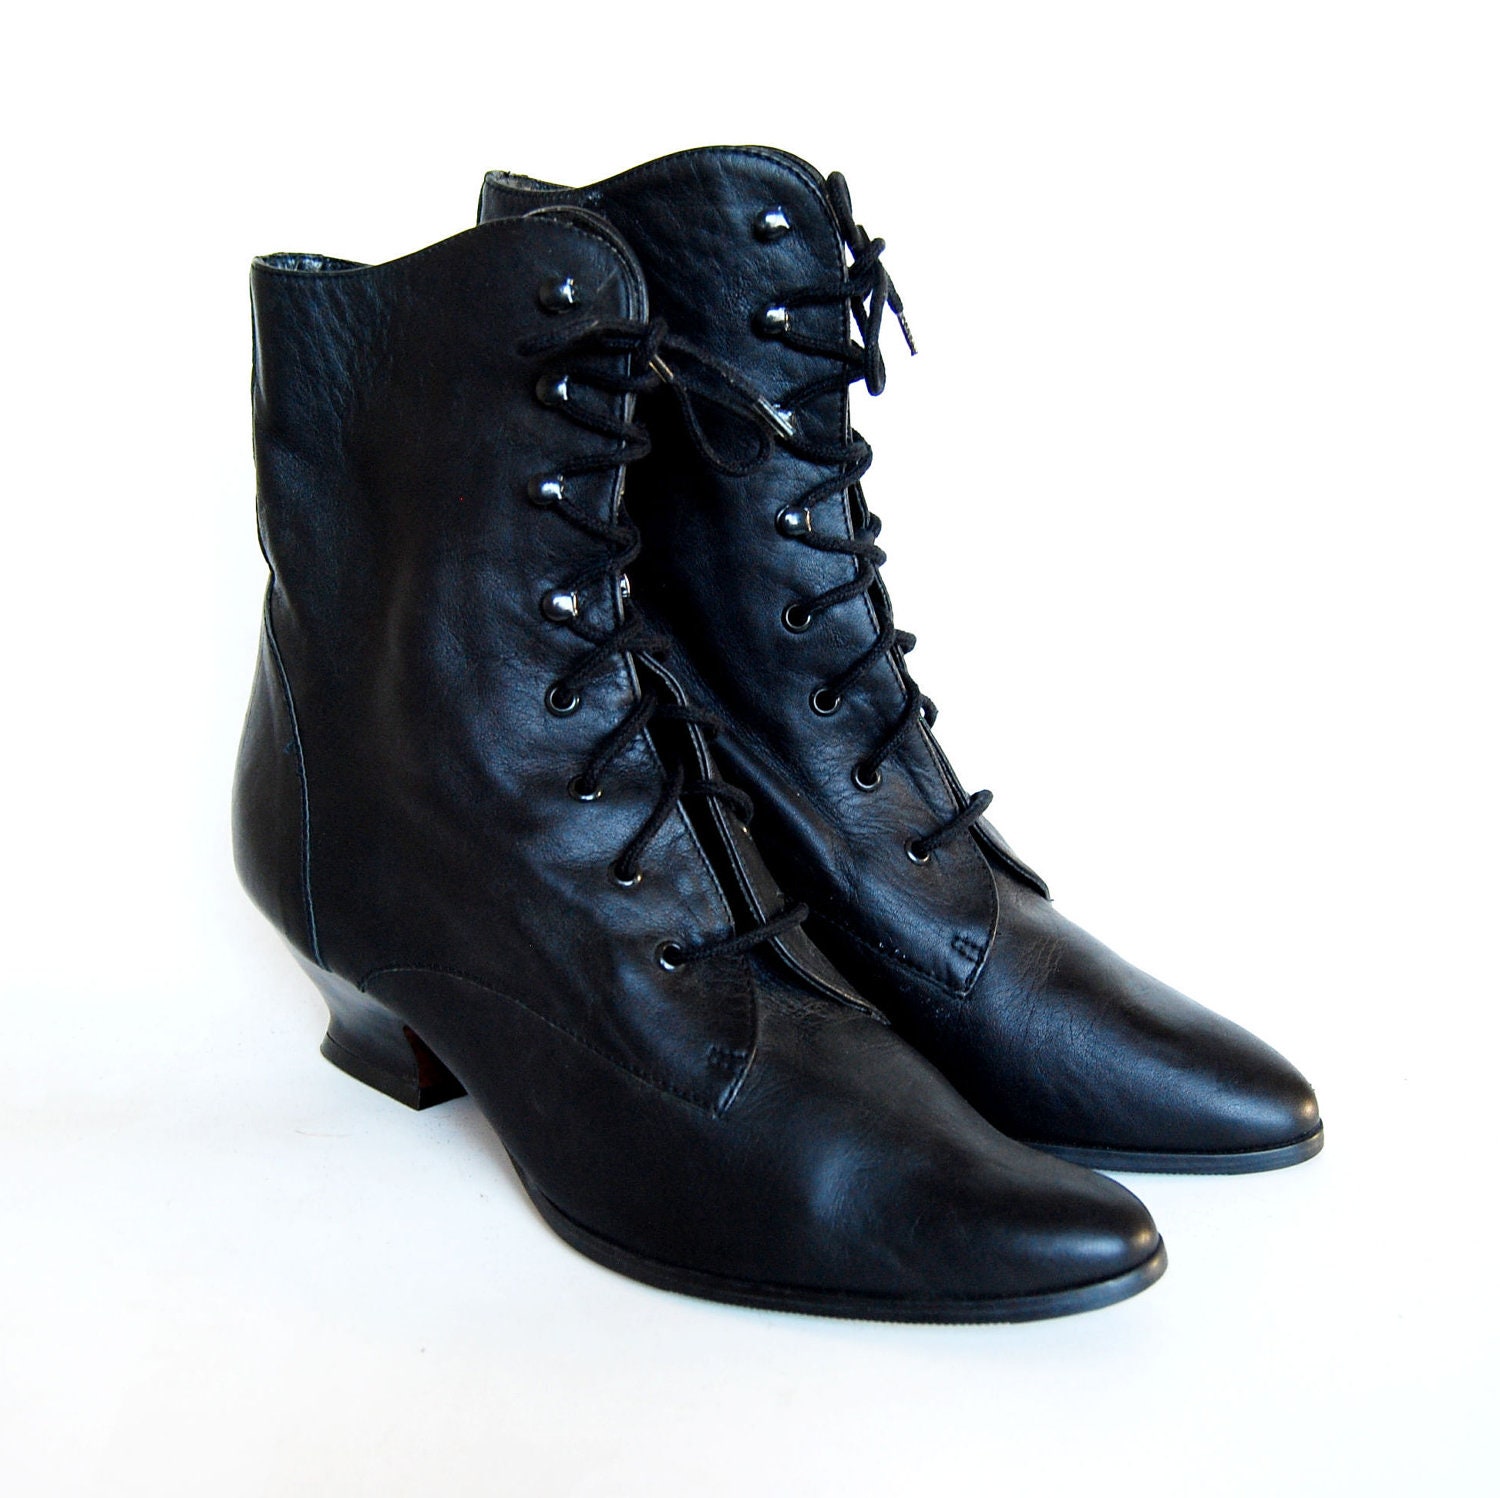 Black Leather Granny Boots 75